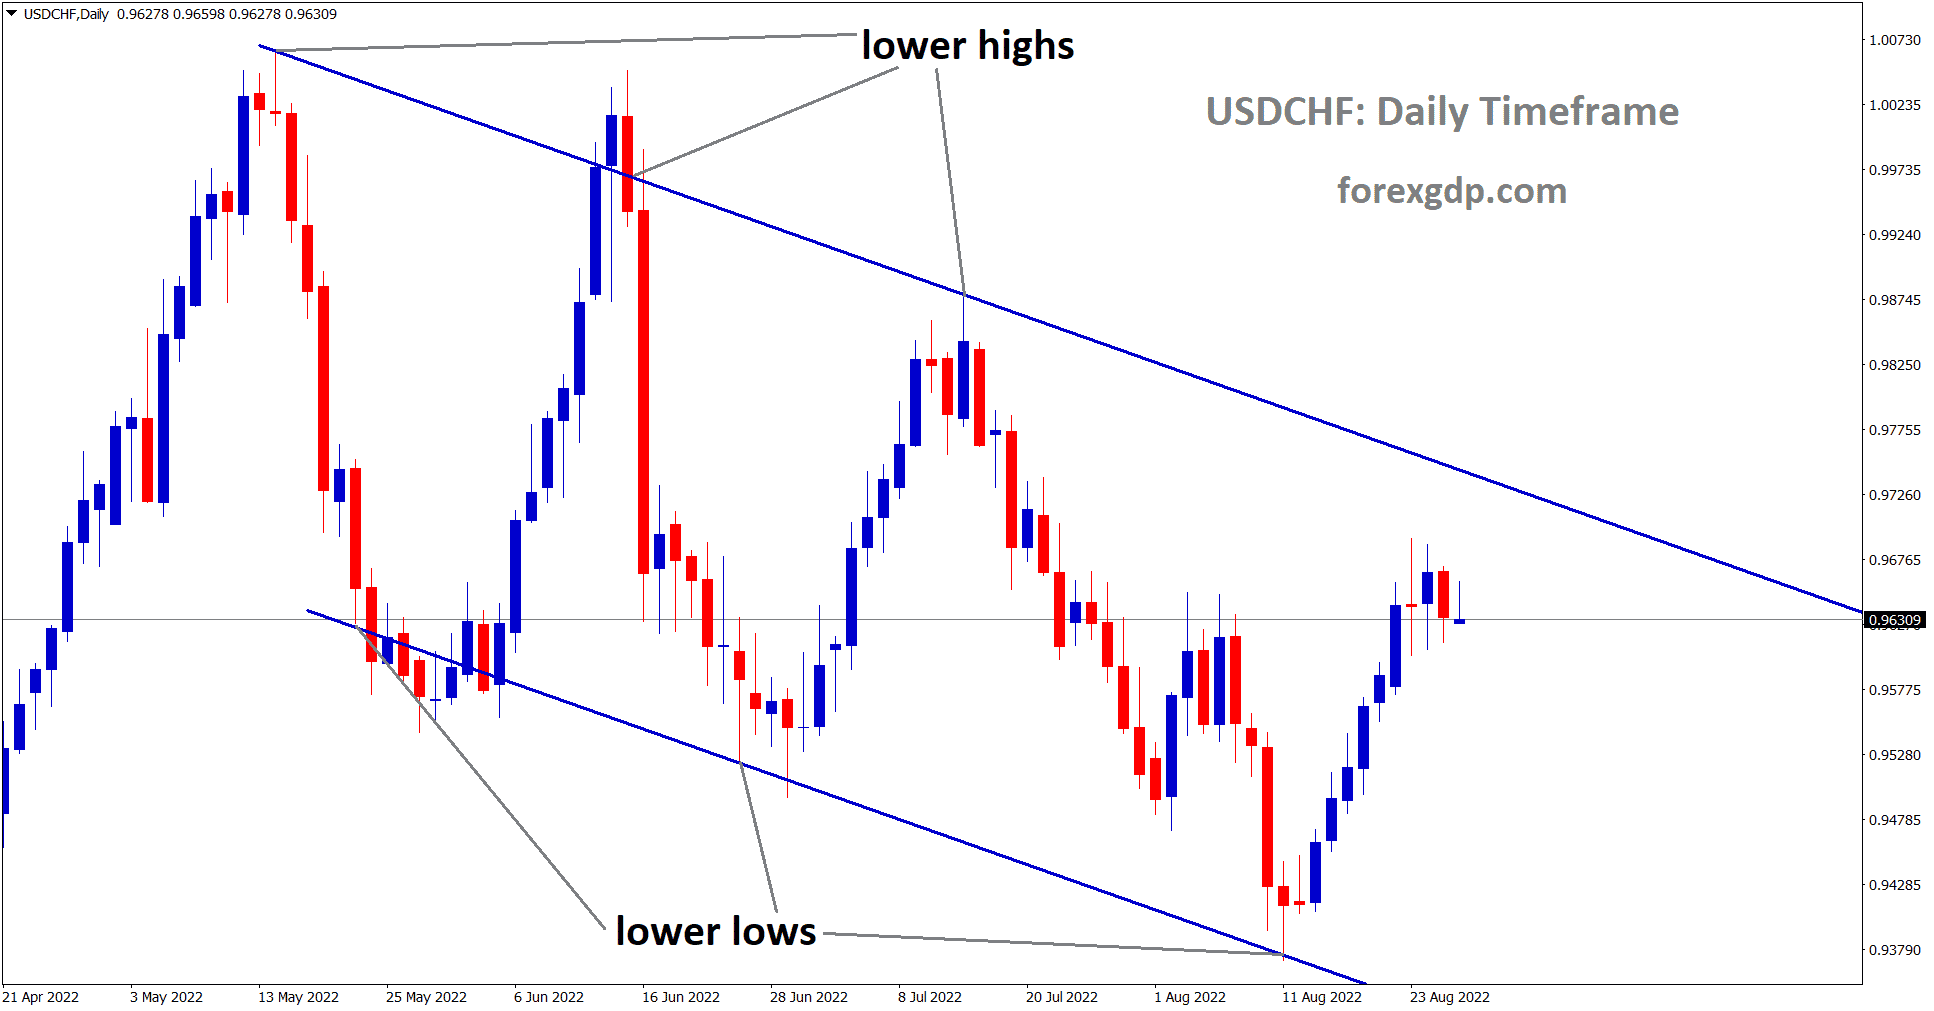 USDCHF is moving in the Descending channel and market has rebounded from the lower low area of the channel